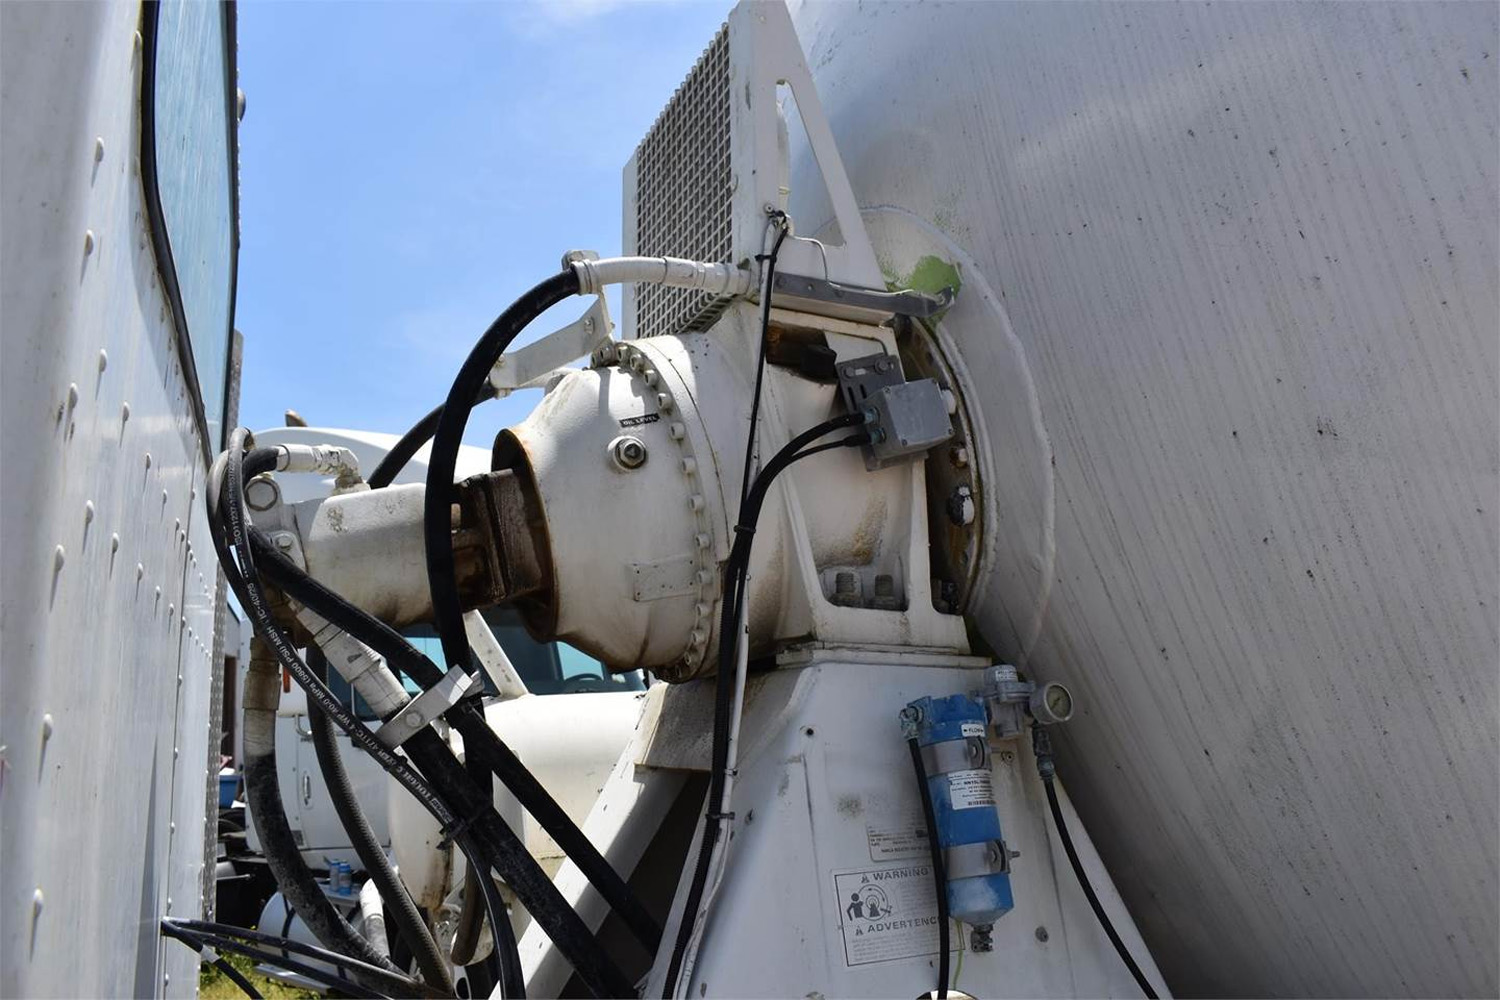 Closeup pic of the mechanical hydraulic system that turns the truck's concrete mixer.